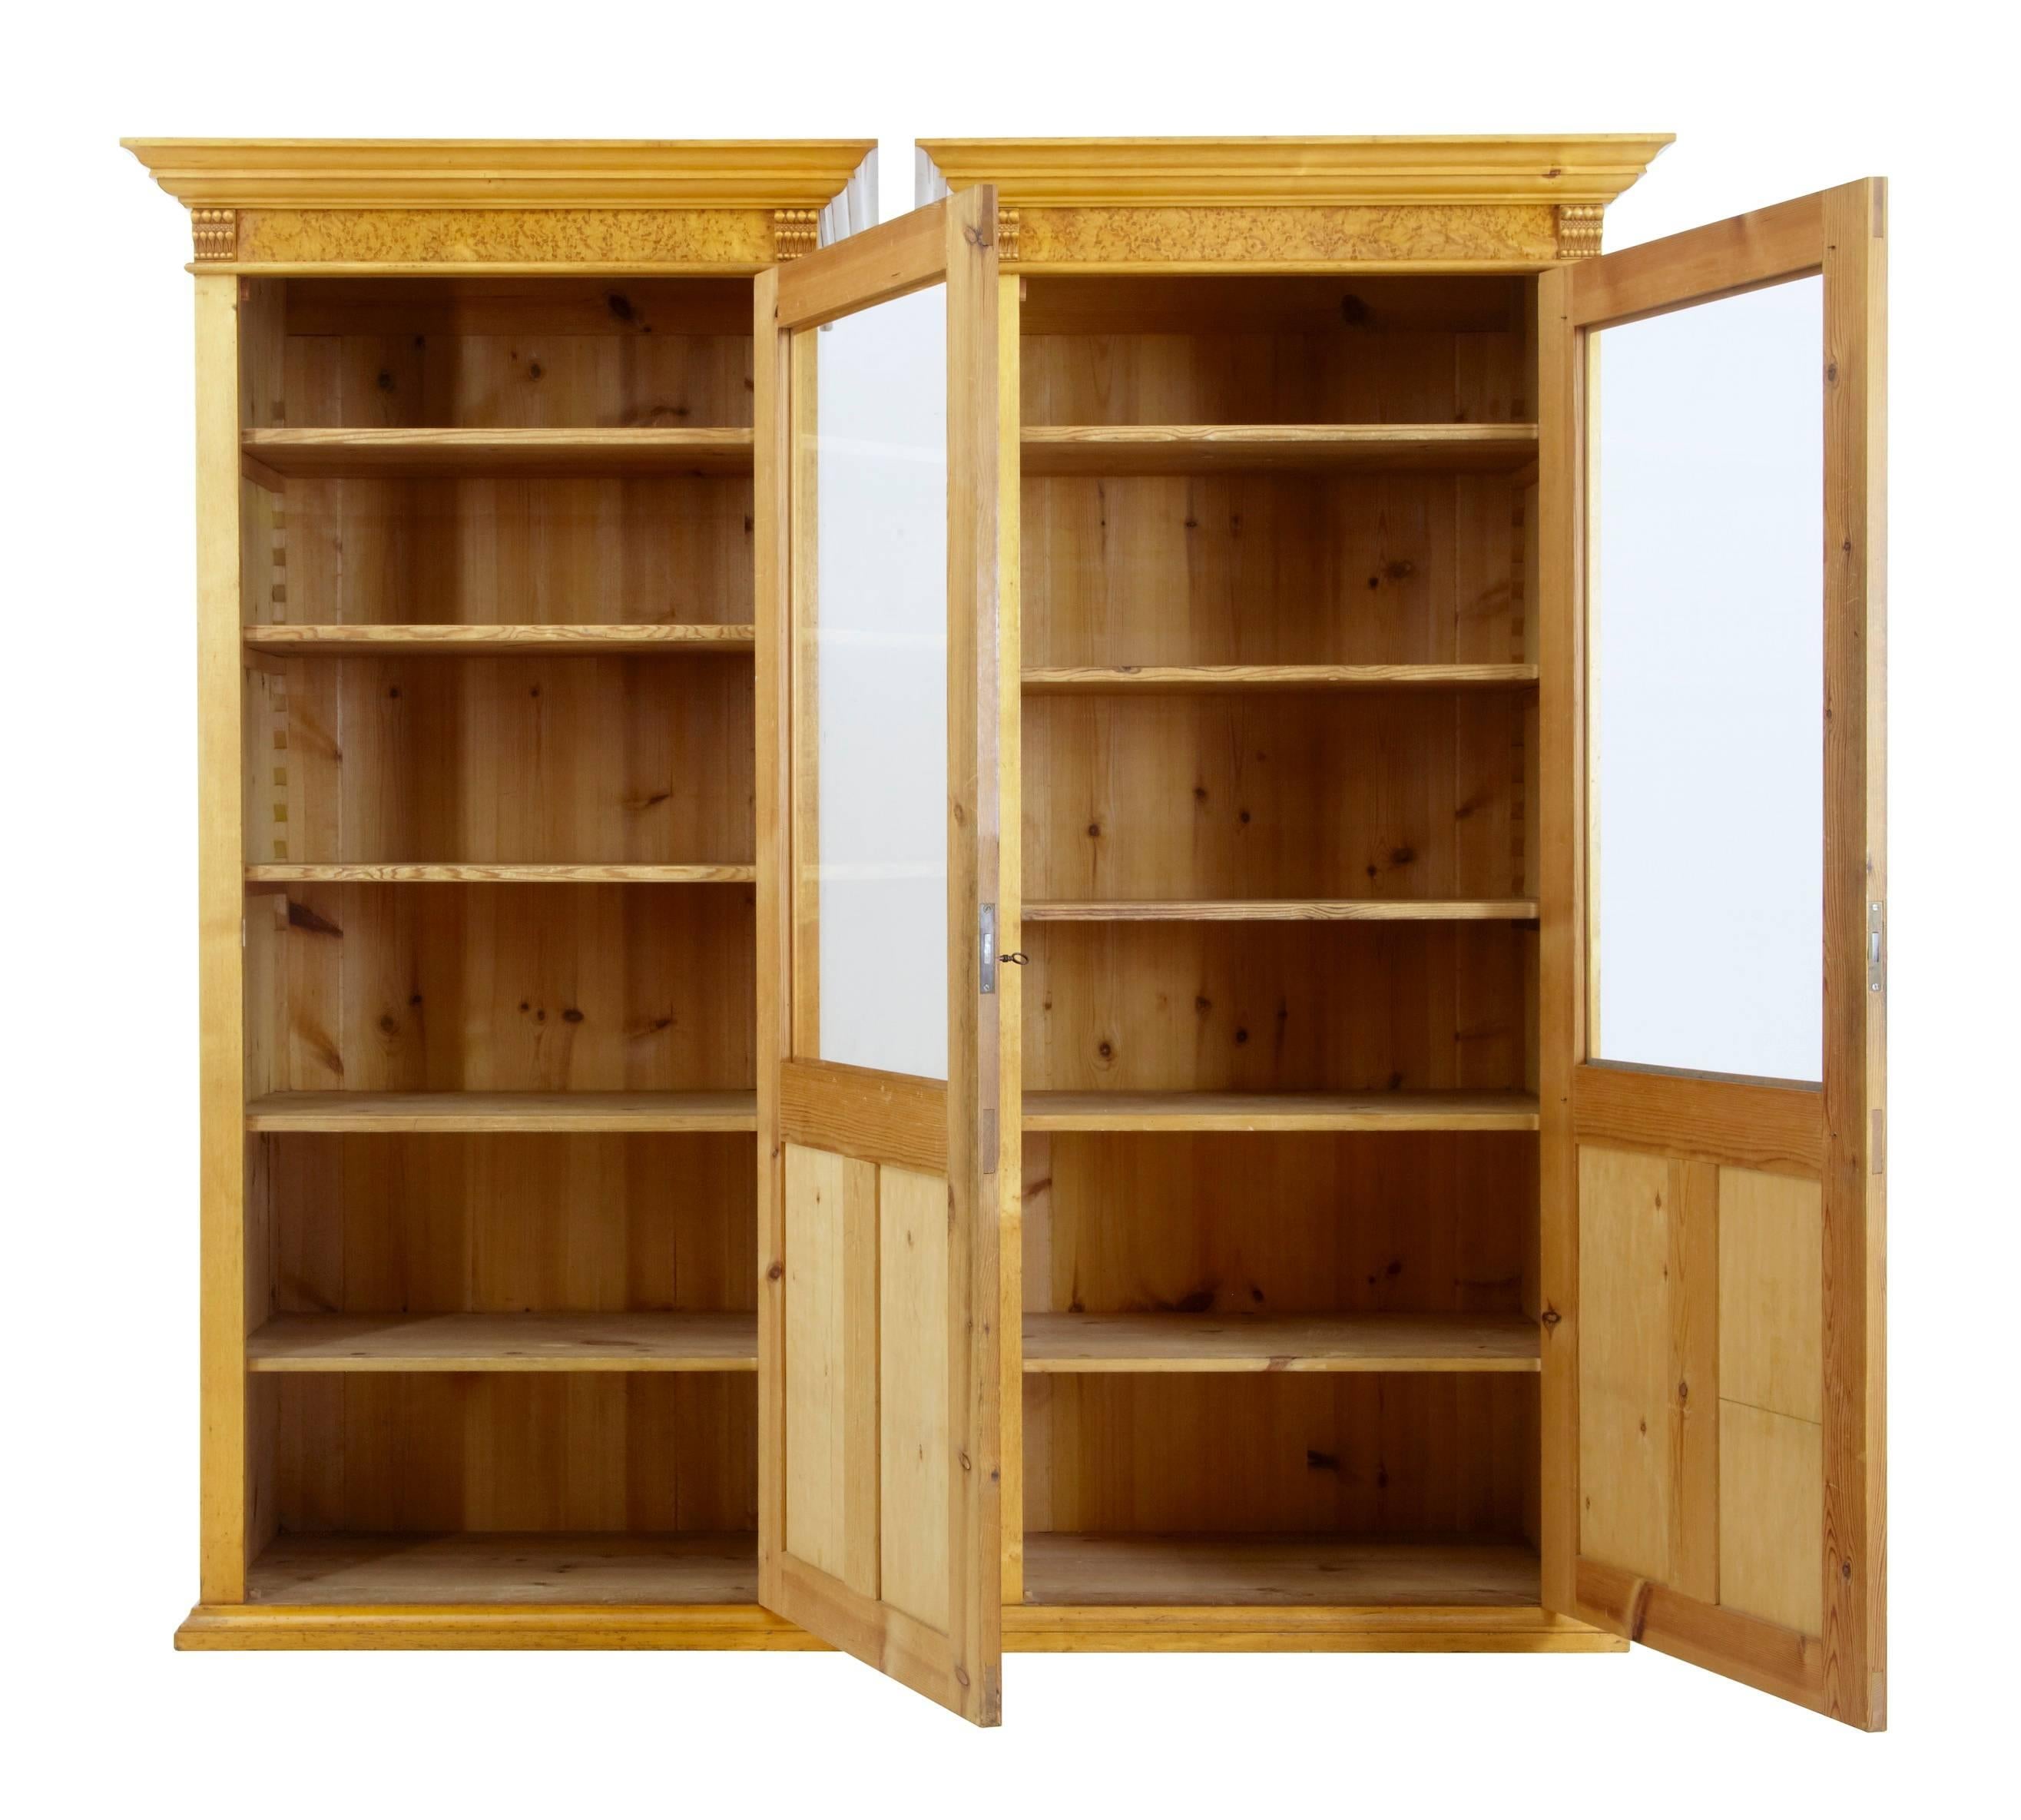 Good quality pair of birch cupboards, circa 1900.
Each with a single door which is two-thirds glazed.
Five adjustable pine shelves.
Rich burr birch veneers.
Evidence of previously having bun feet, which may be a useful